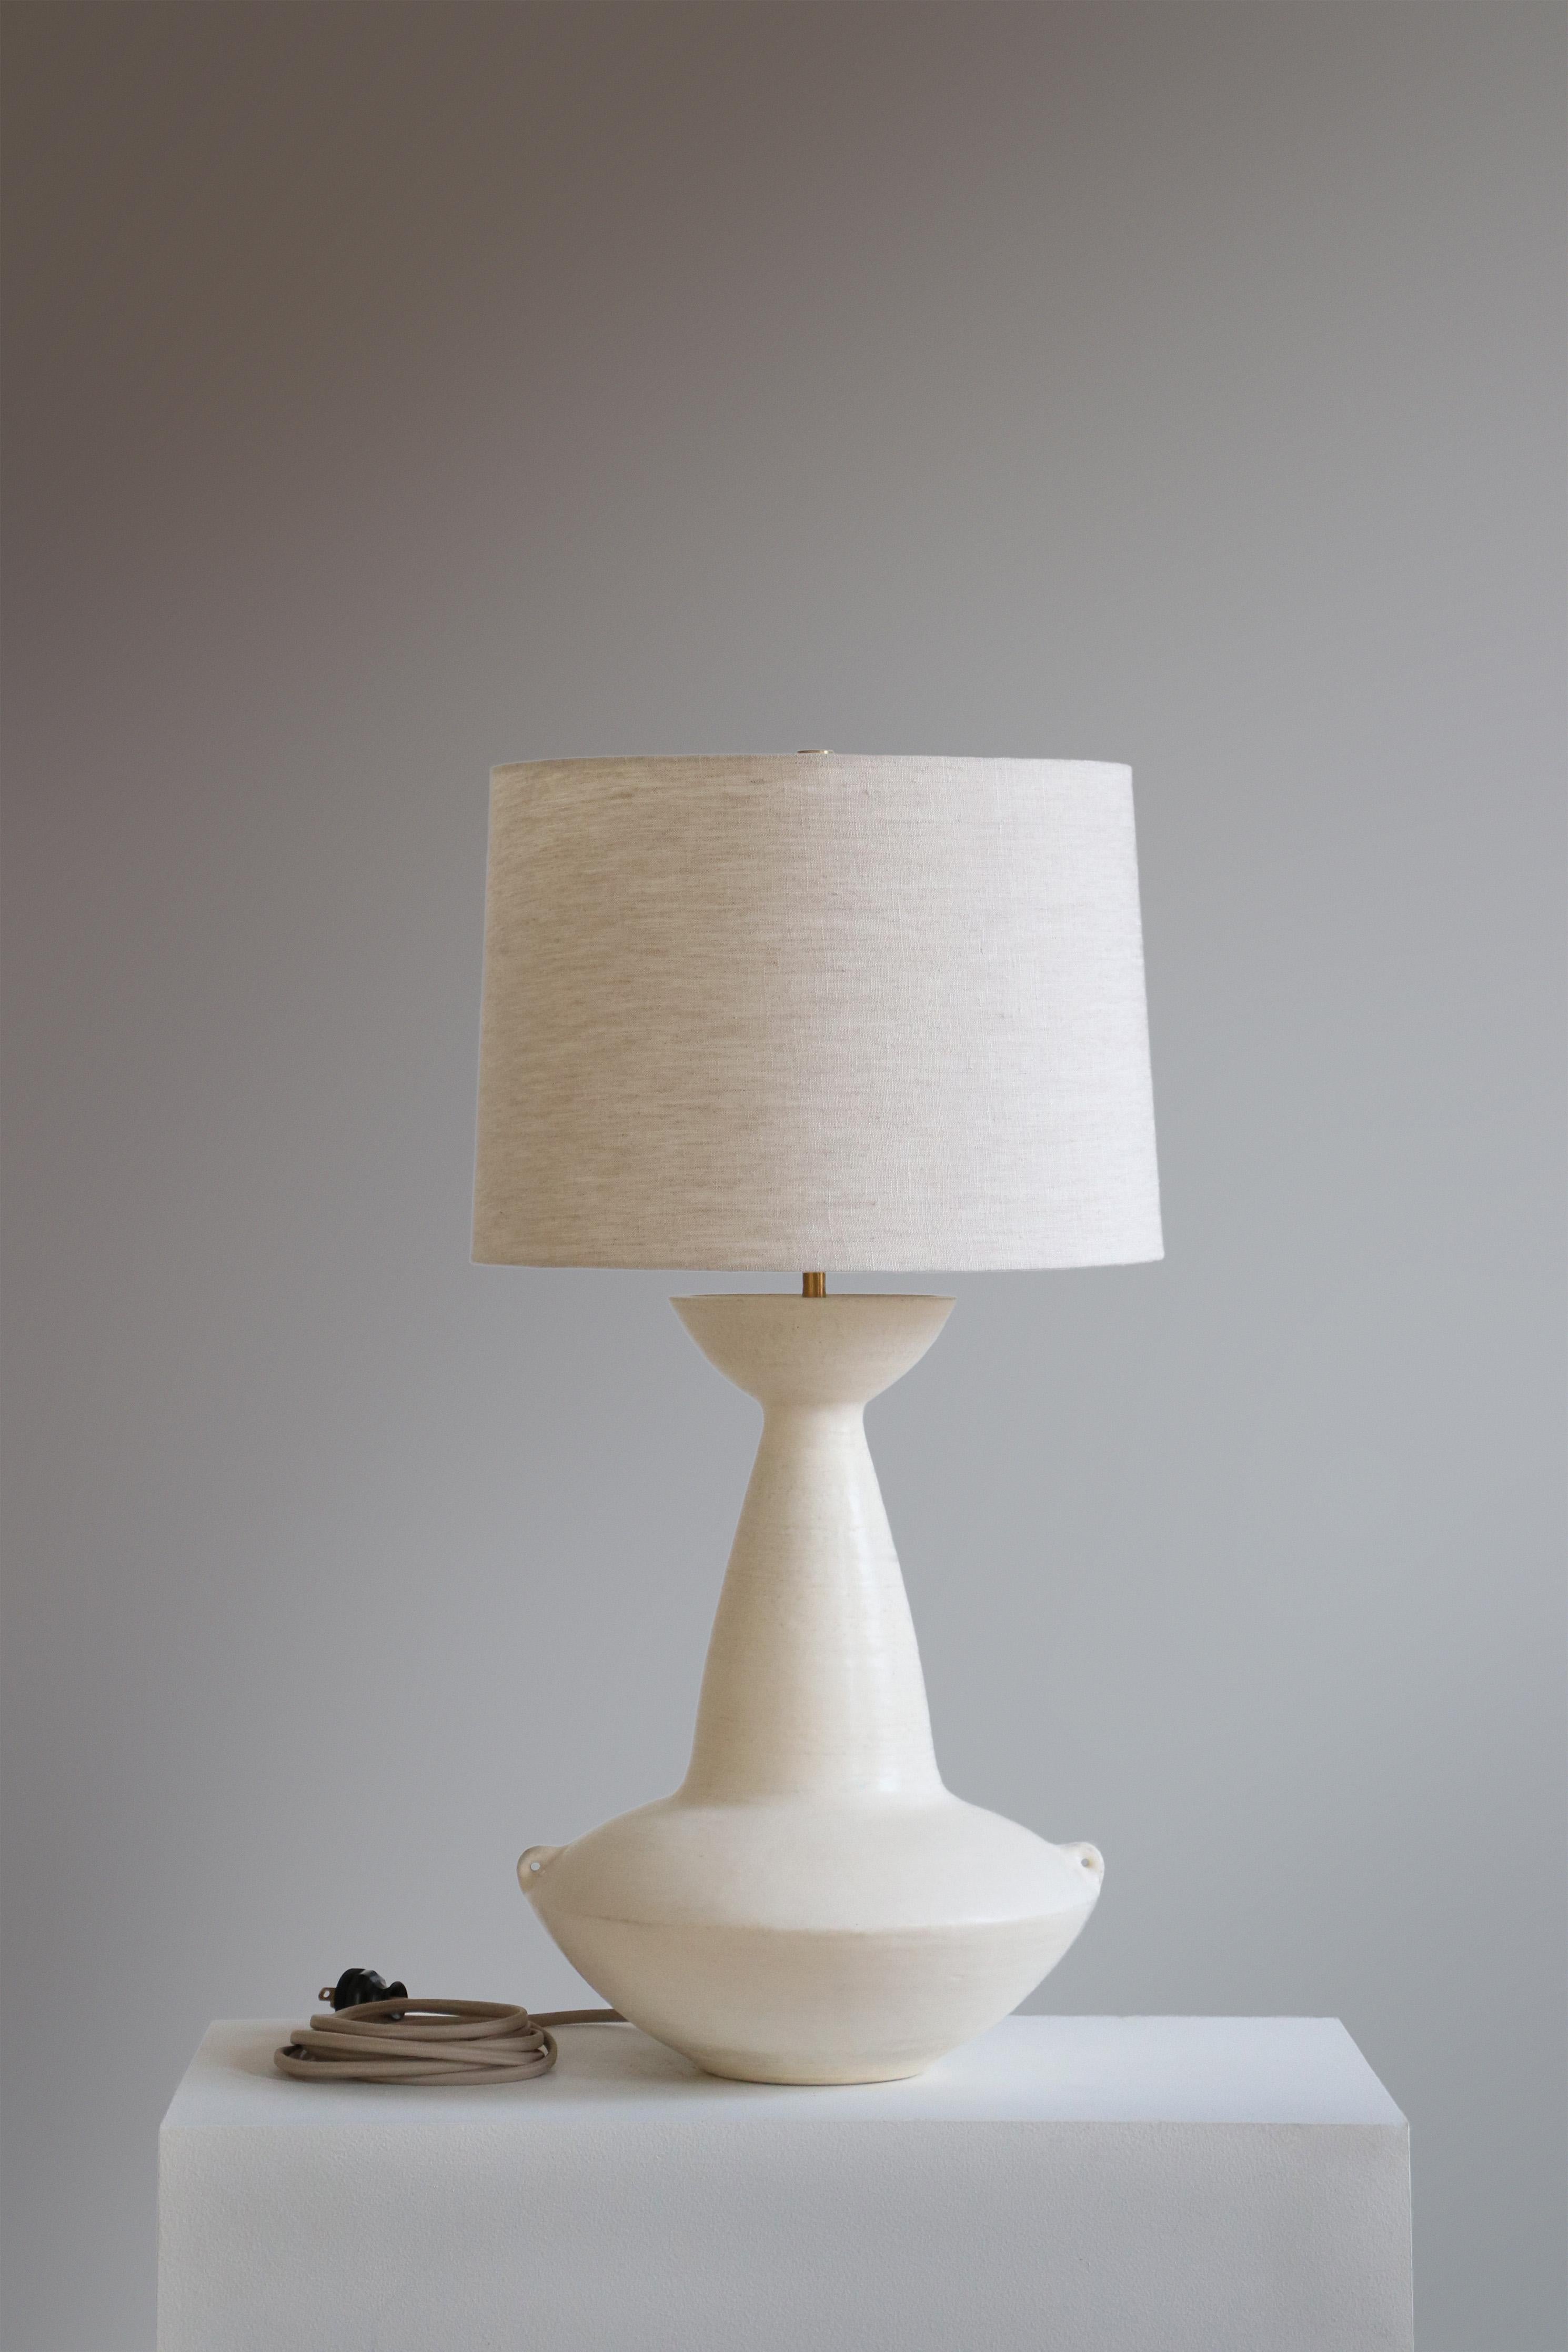 Stone Claudius Table Lamp by Danny Kaplan Studio
Dimensions: ⌀ 36 x H 69 cm
Materials: Glazed Ceramic, Unfinished Brass, Linen

This item is handmade, and may exhibit variability within the same piece. We do our best to maintain a consistent